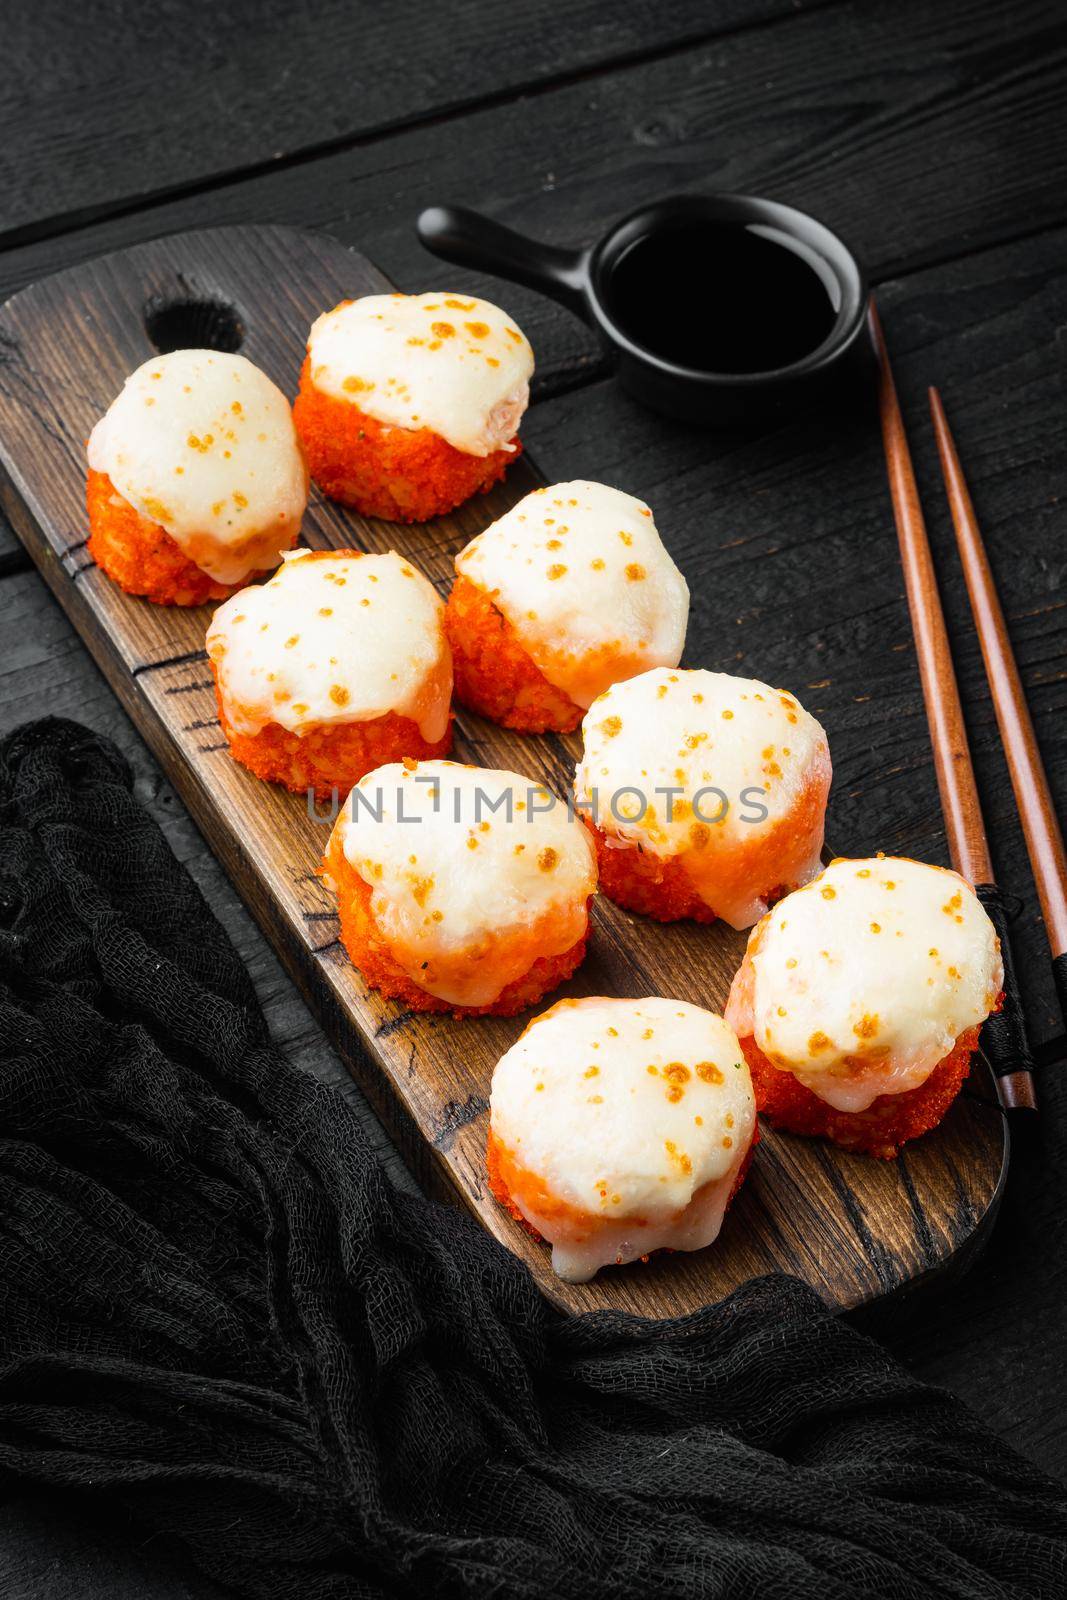 Baked sushi maki rolls with salmon, crab, cucumber, avocado, flying fish roe and spicy sauce, on black wooden table background by Ilianesolenyi